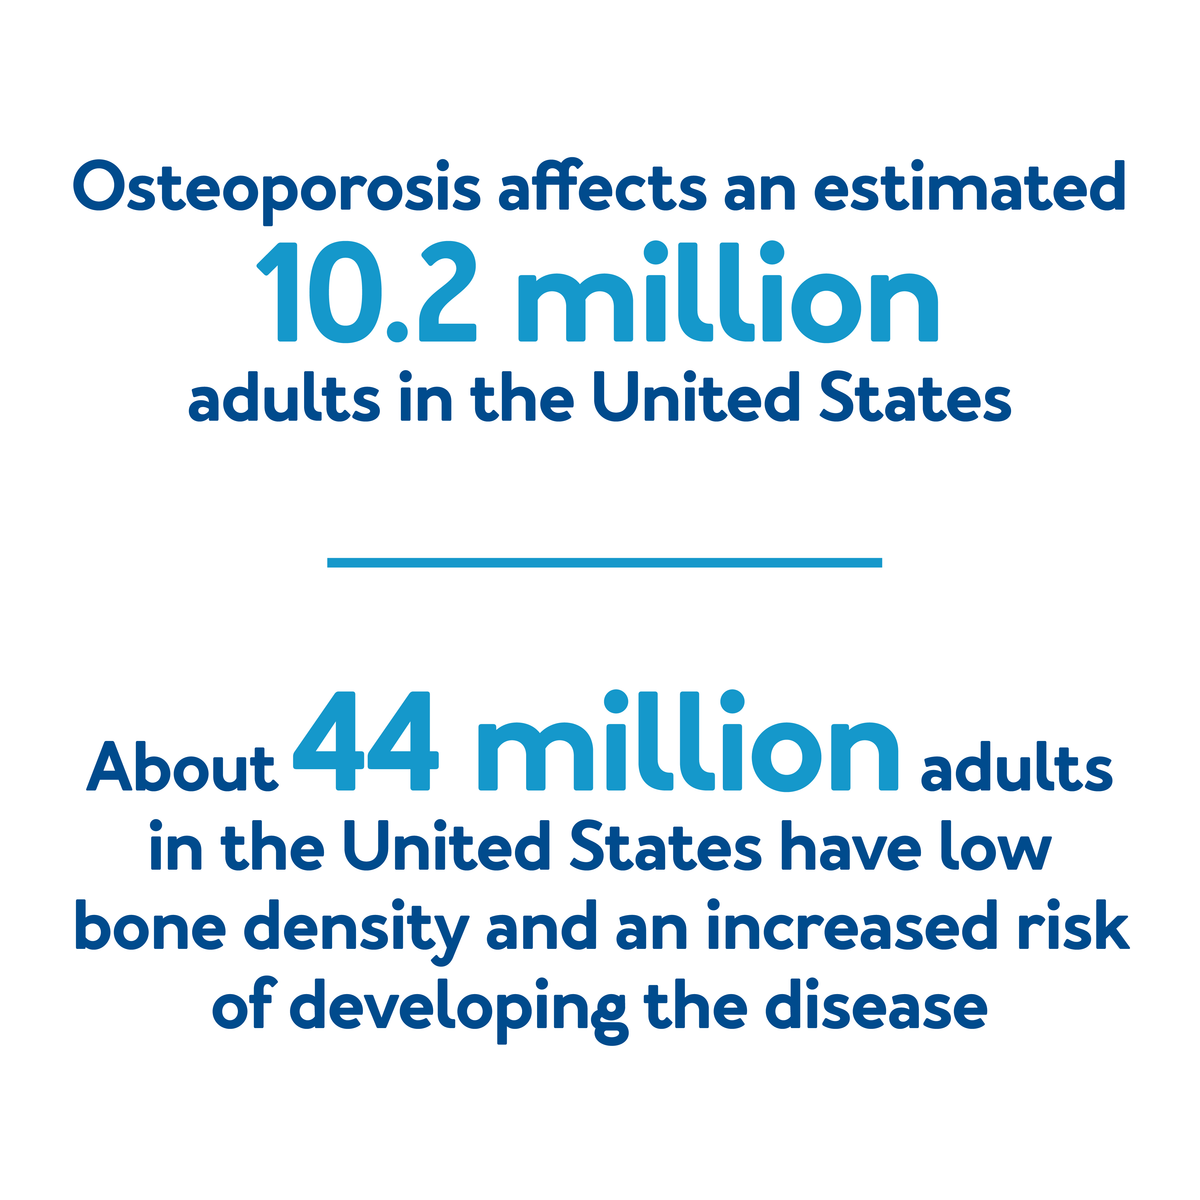 Osteoporosis affects an estimated 10.2 million adults in the United States. further details are provided below.